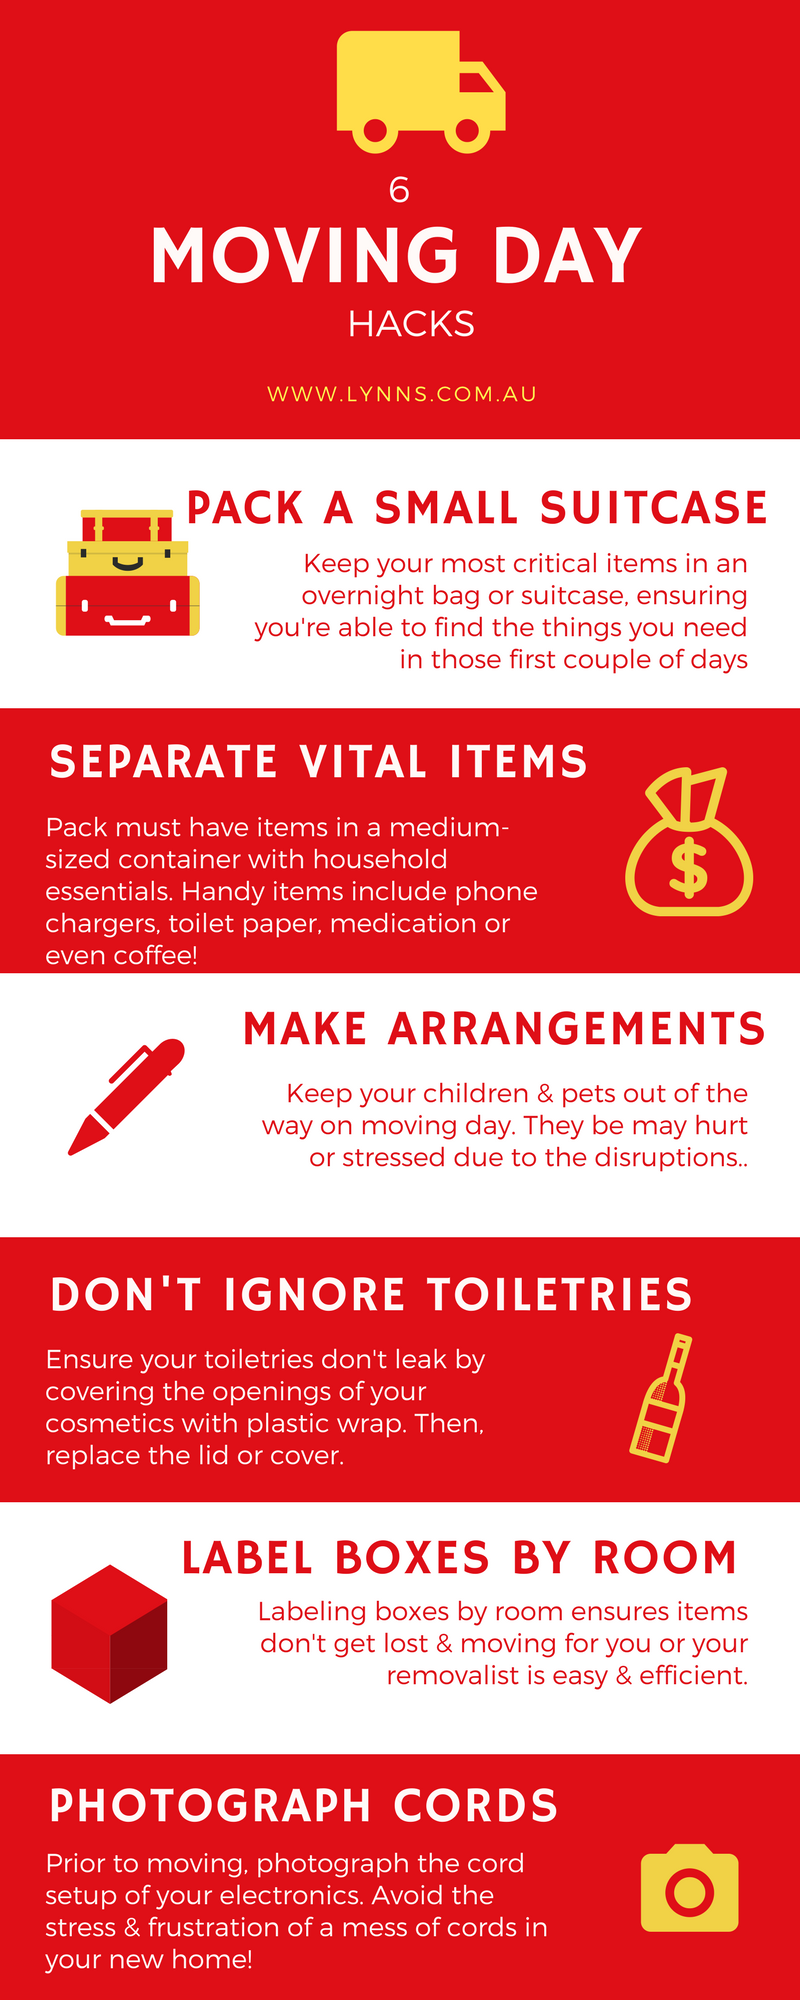 moving day hacks infographic